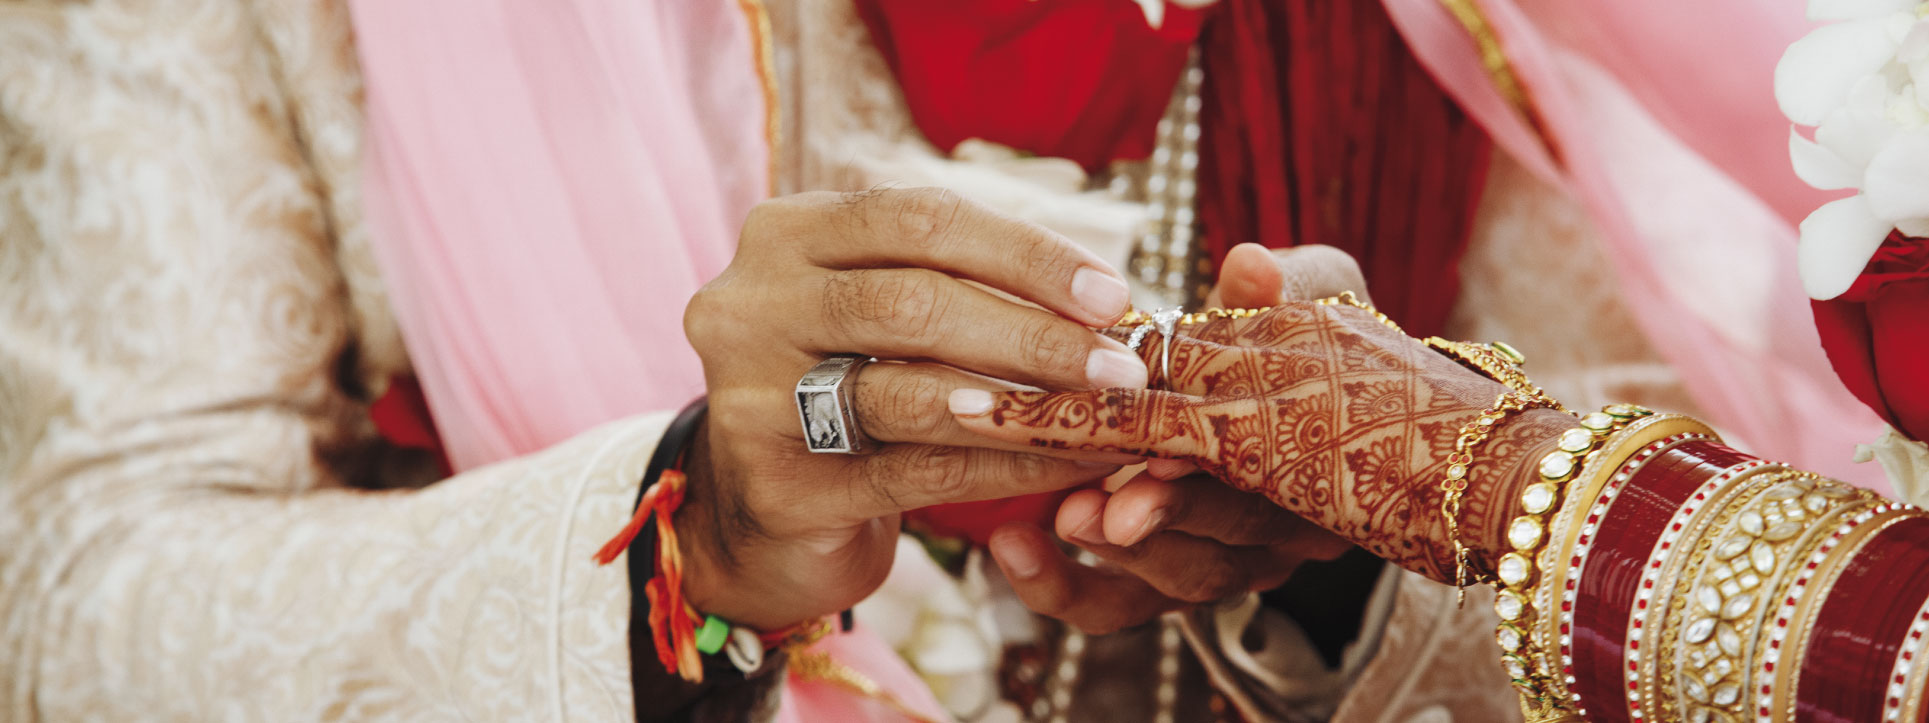 10 Ways South Indian Weddings Are Different From North Indian Weddings